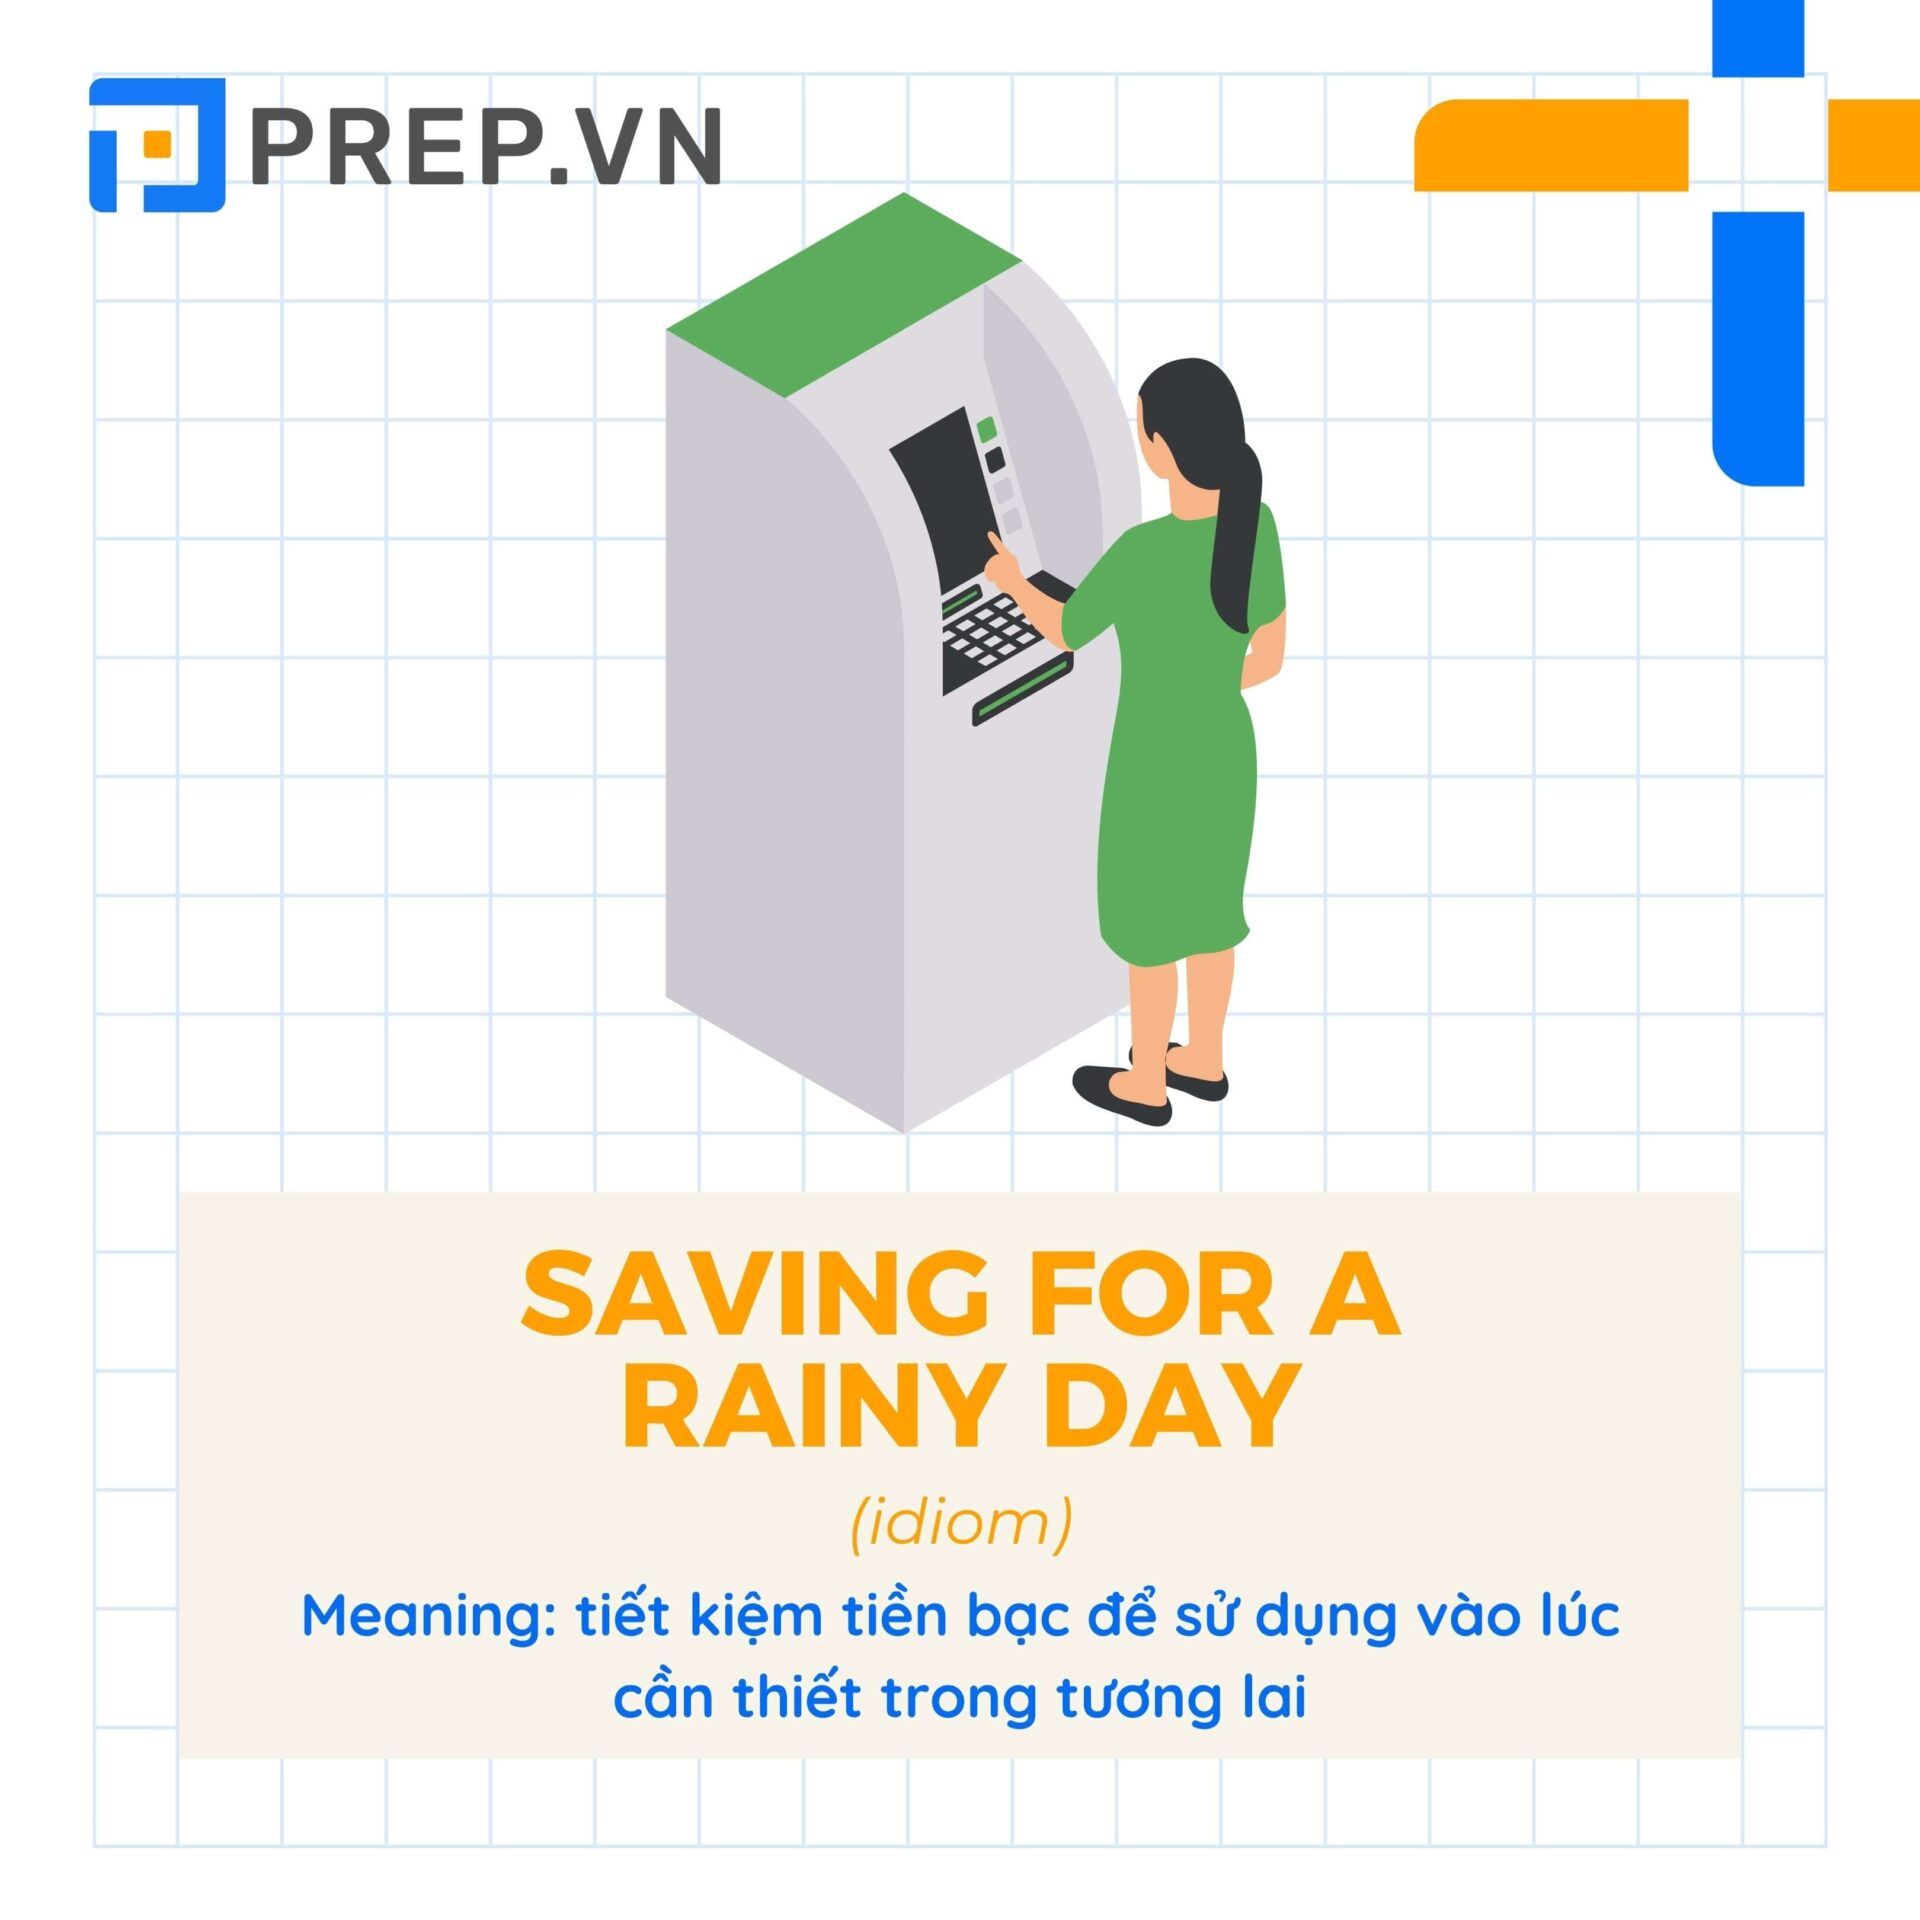 Saving for a rainy day